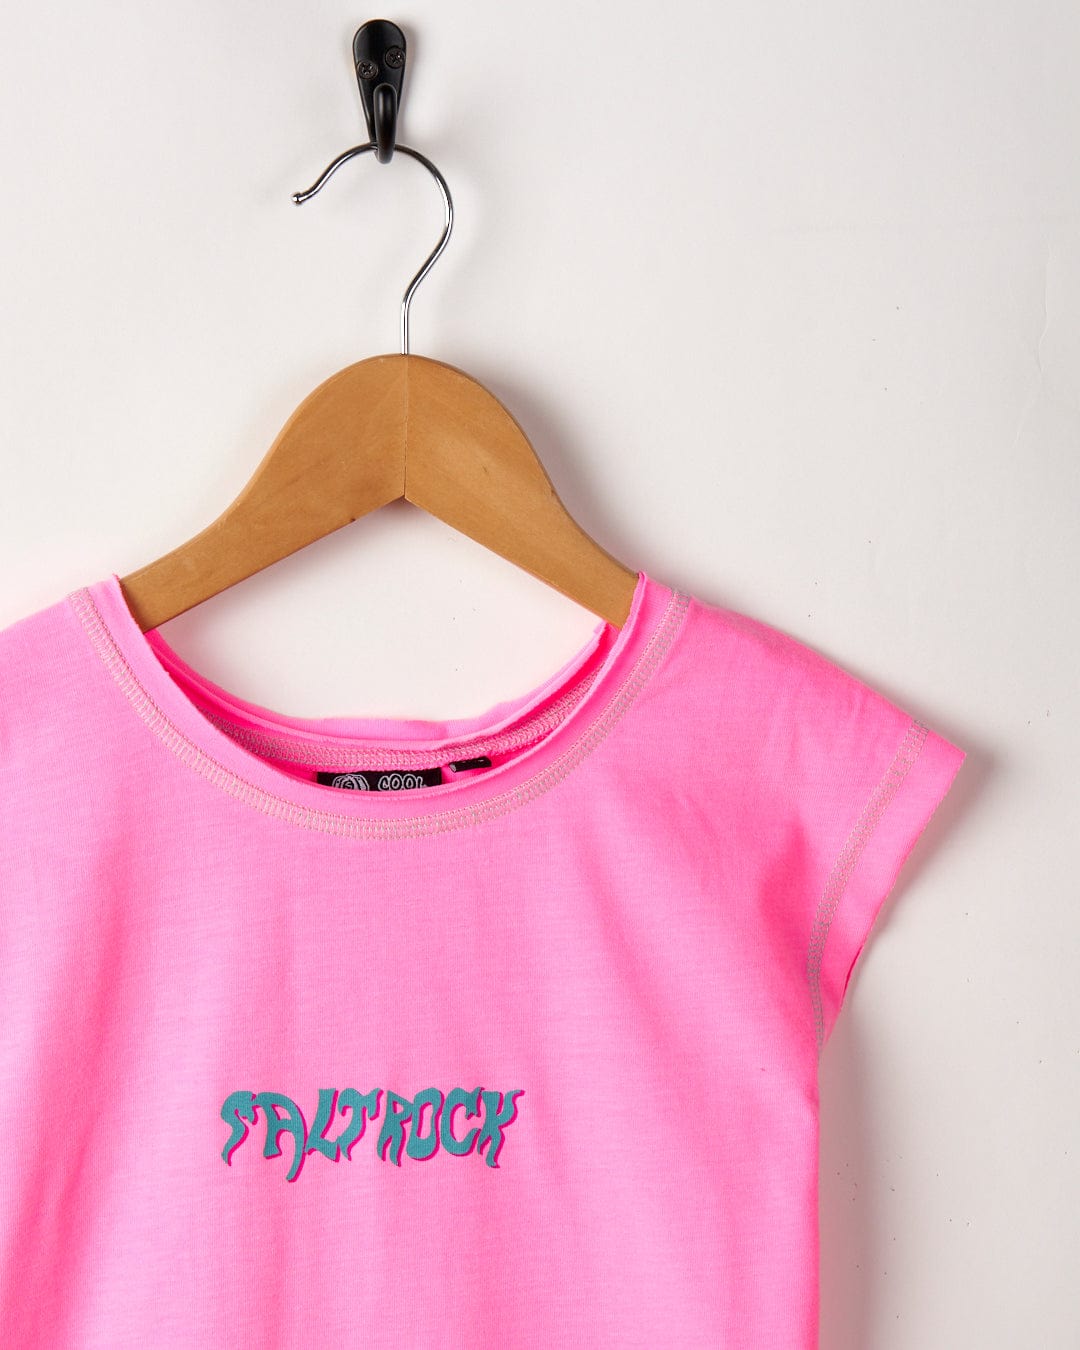 A pink sleeveless vest with the word "MYROCK" in teal, hanging on a wooden hanger against a white background. 
Replace with:
A Mystic Skulls - Recycled Kids Longline Vest - Pink with the word "Saltrock" in teal, hanging on a wooden hanger against a white background.